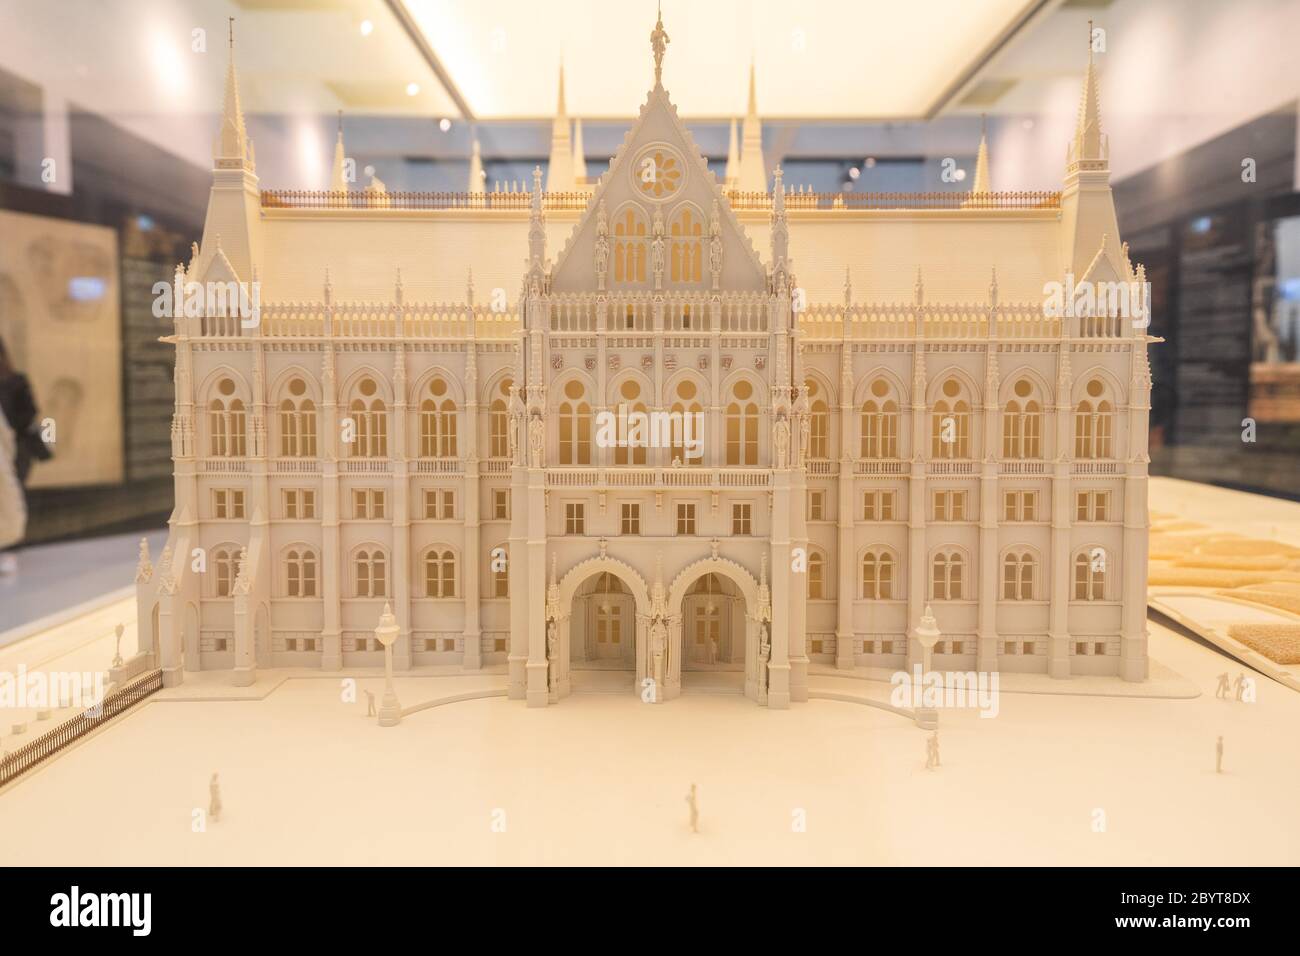 Budapest, Hungary - Feb 10, 2020: Miniature model of Hungarian Parliament in exhibition Stock Photo